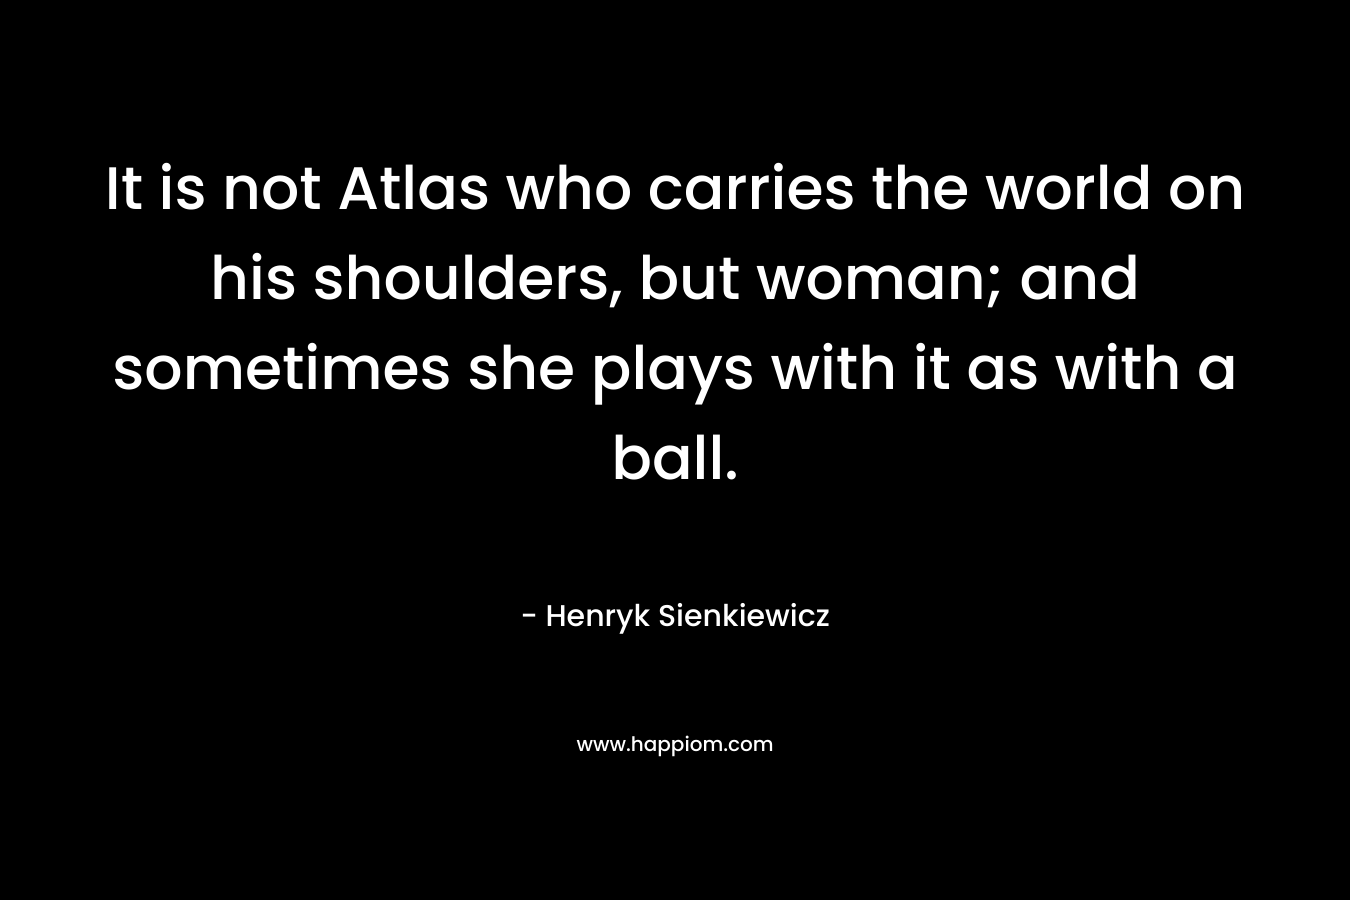 It is not Atlas who carries the world on his shoulders, but woman; and sometimes she plays with it as with a ball.